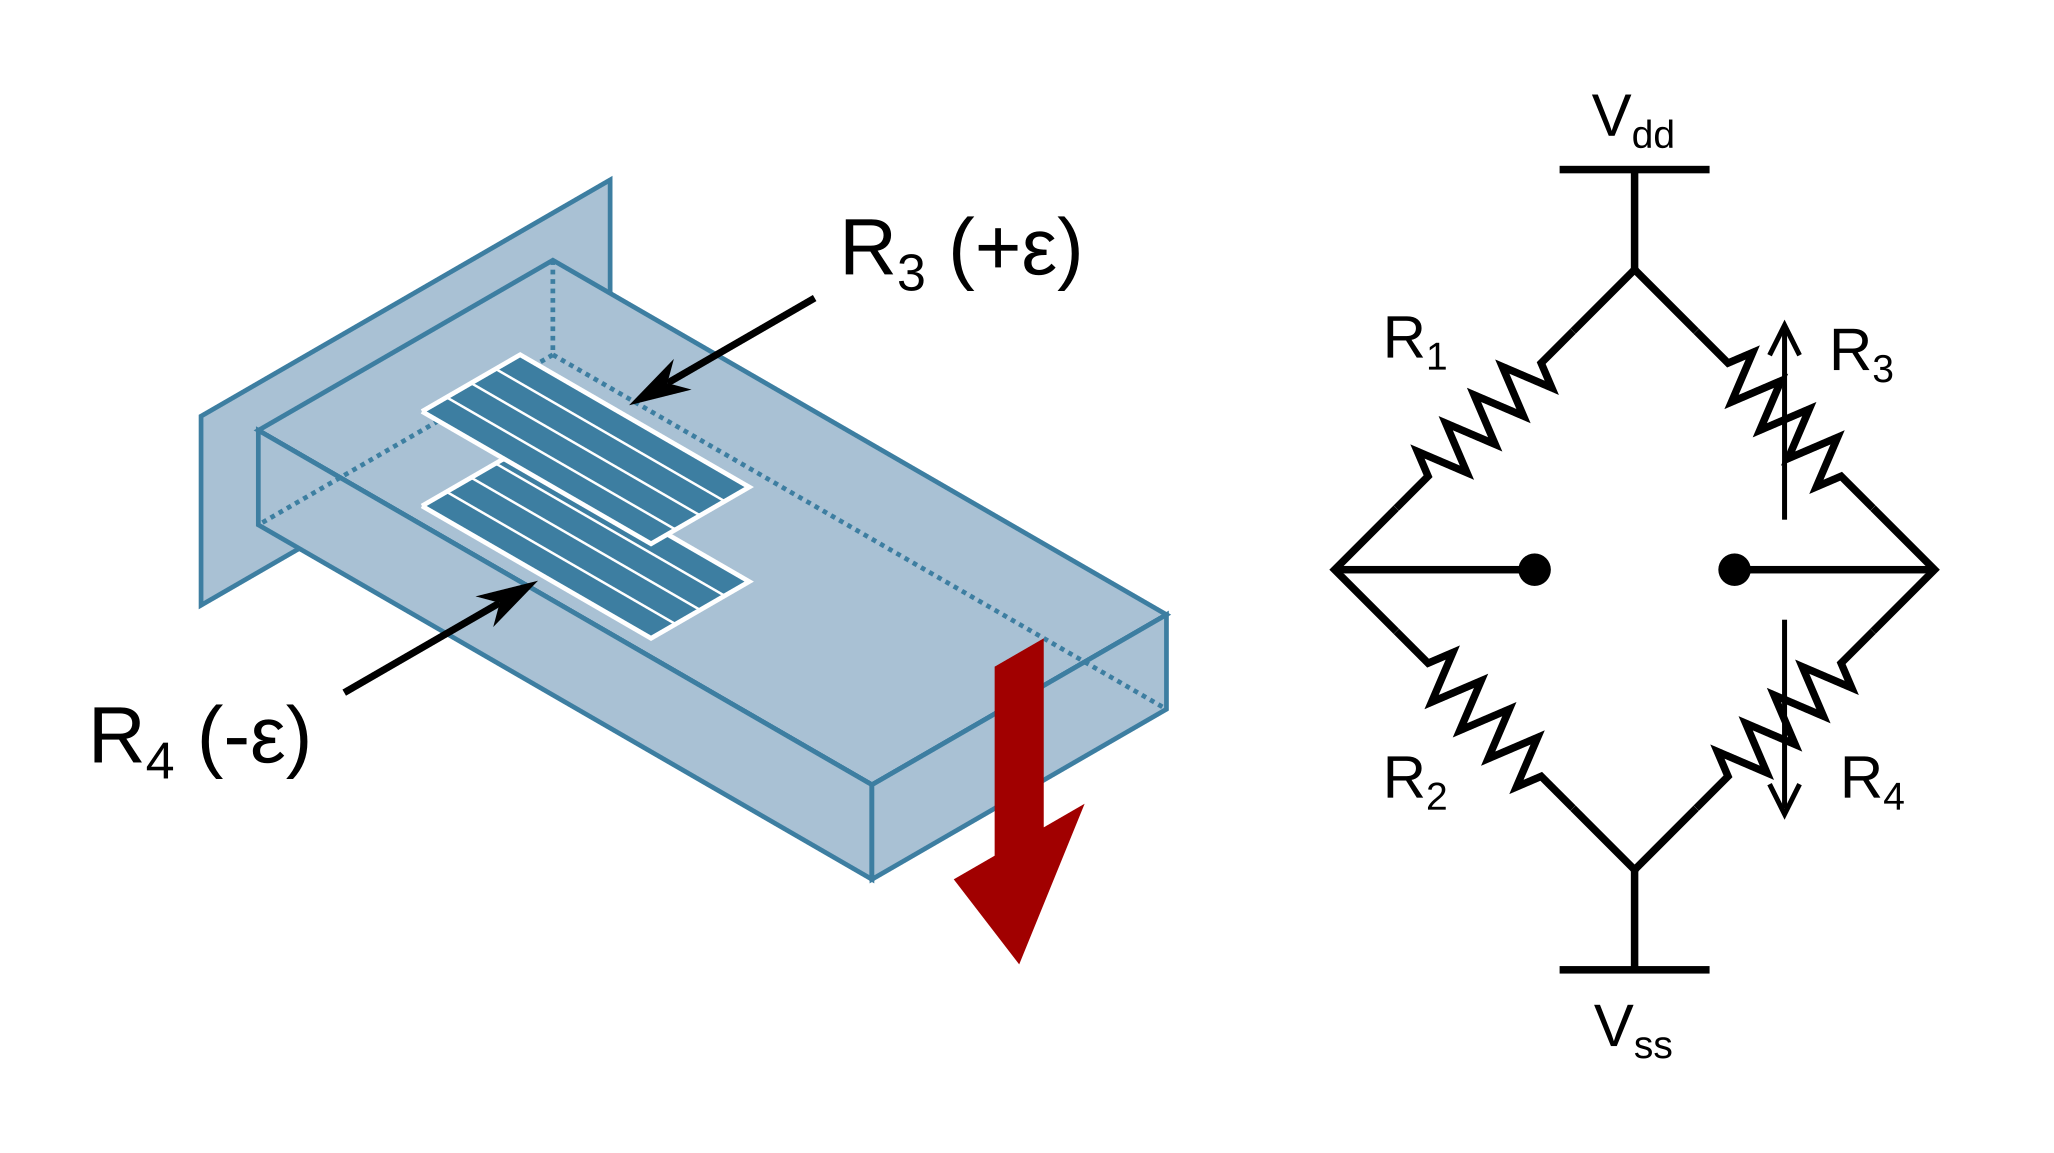 On the left is an isometric drawing of a beam fixed to a wall with strain gauges mounted top and bottom, designated R3 and R4. On the right is an electrical schematic showing R3 and R4 appearing on the right side of a classic Wheatstone bridge circuit.